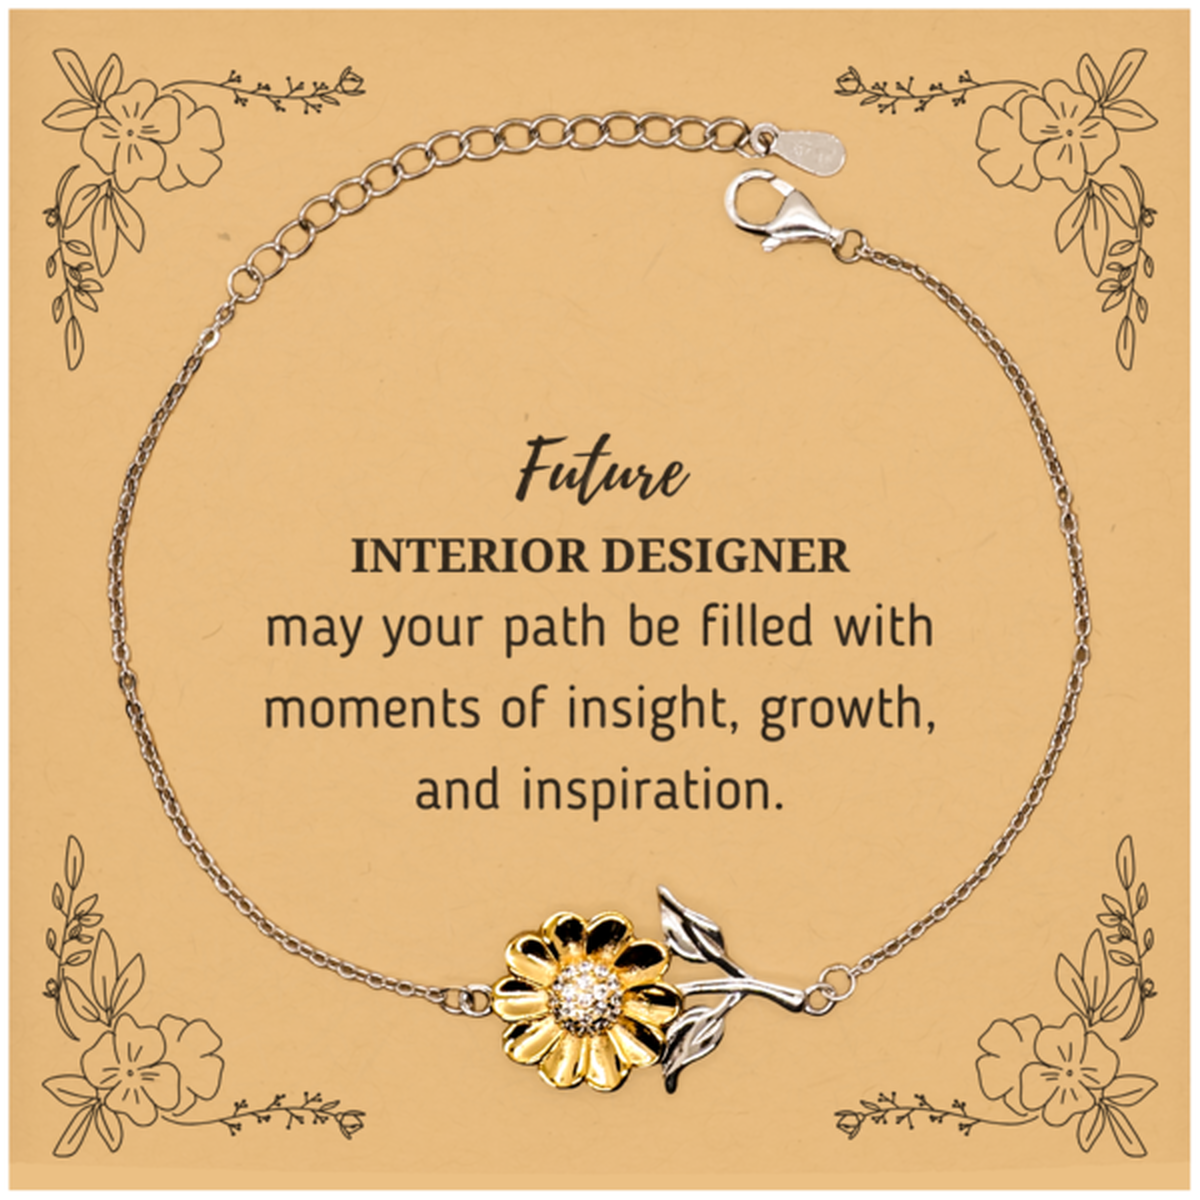 Future Interior Designer Gifts, May your path be filled with moments of insight, Graduation Gifts for New Interior Designer, Christmas Unique Sunflower Bracelet For Men, Women, Friends